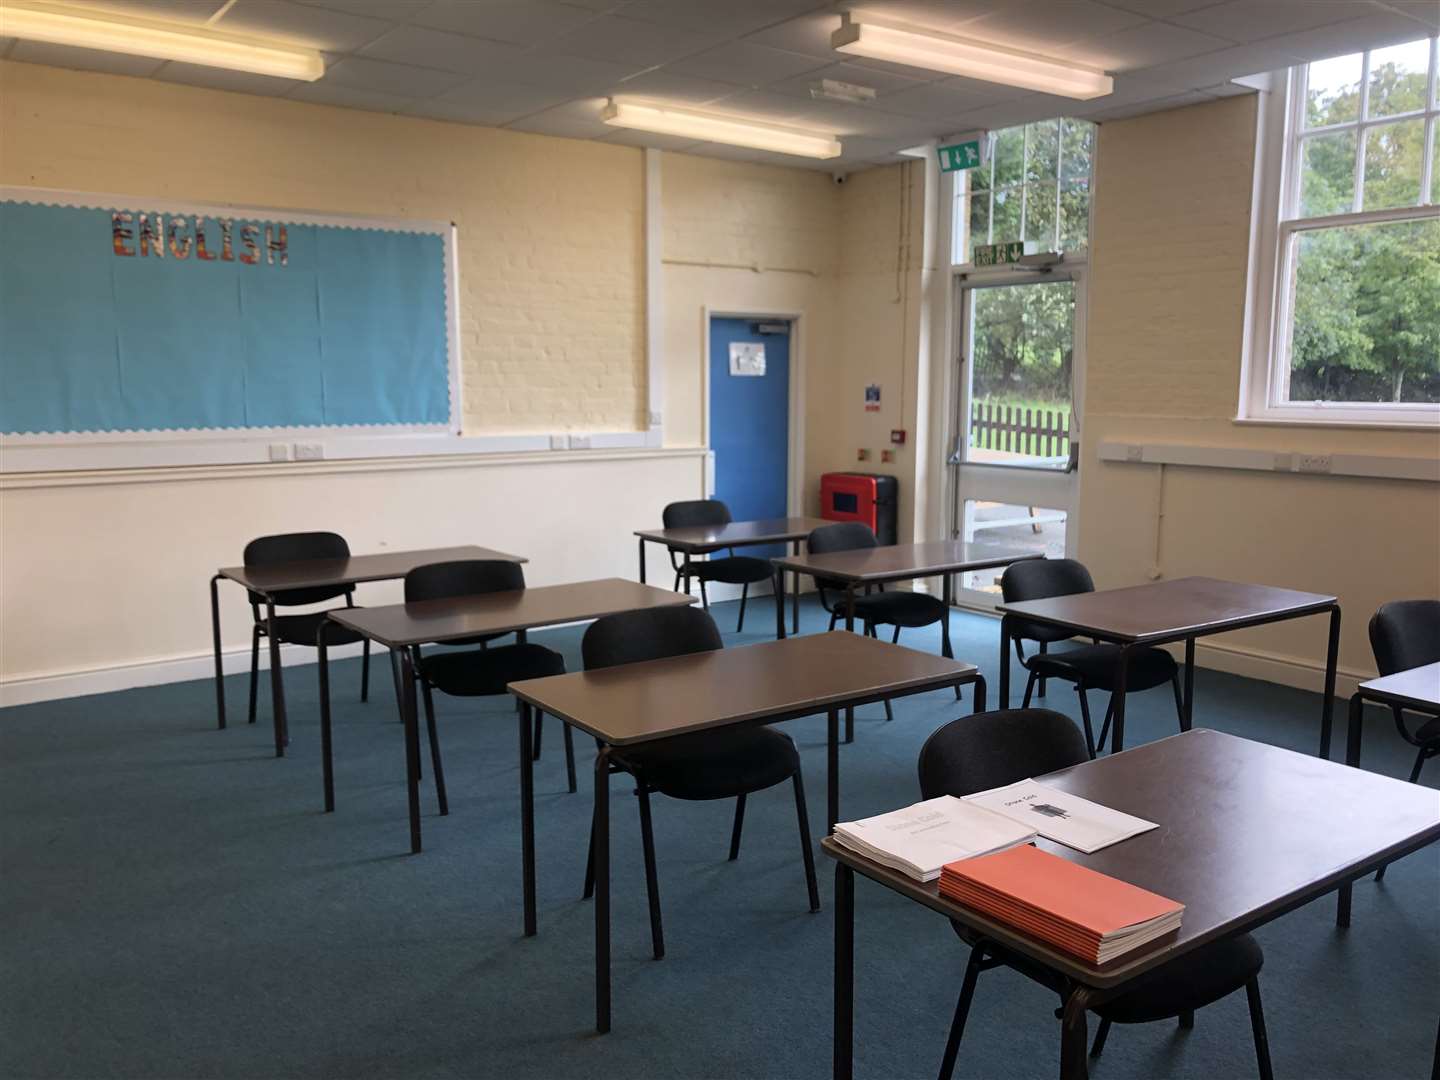 Students at Infiniti School in Doddington will be in groups of eight with a teacher and teaching assistant